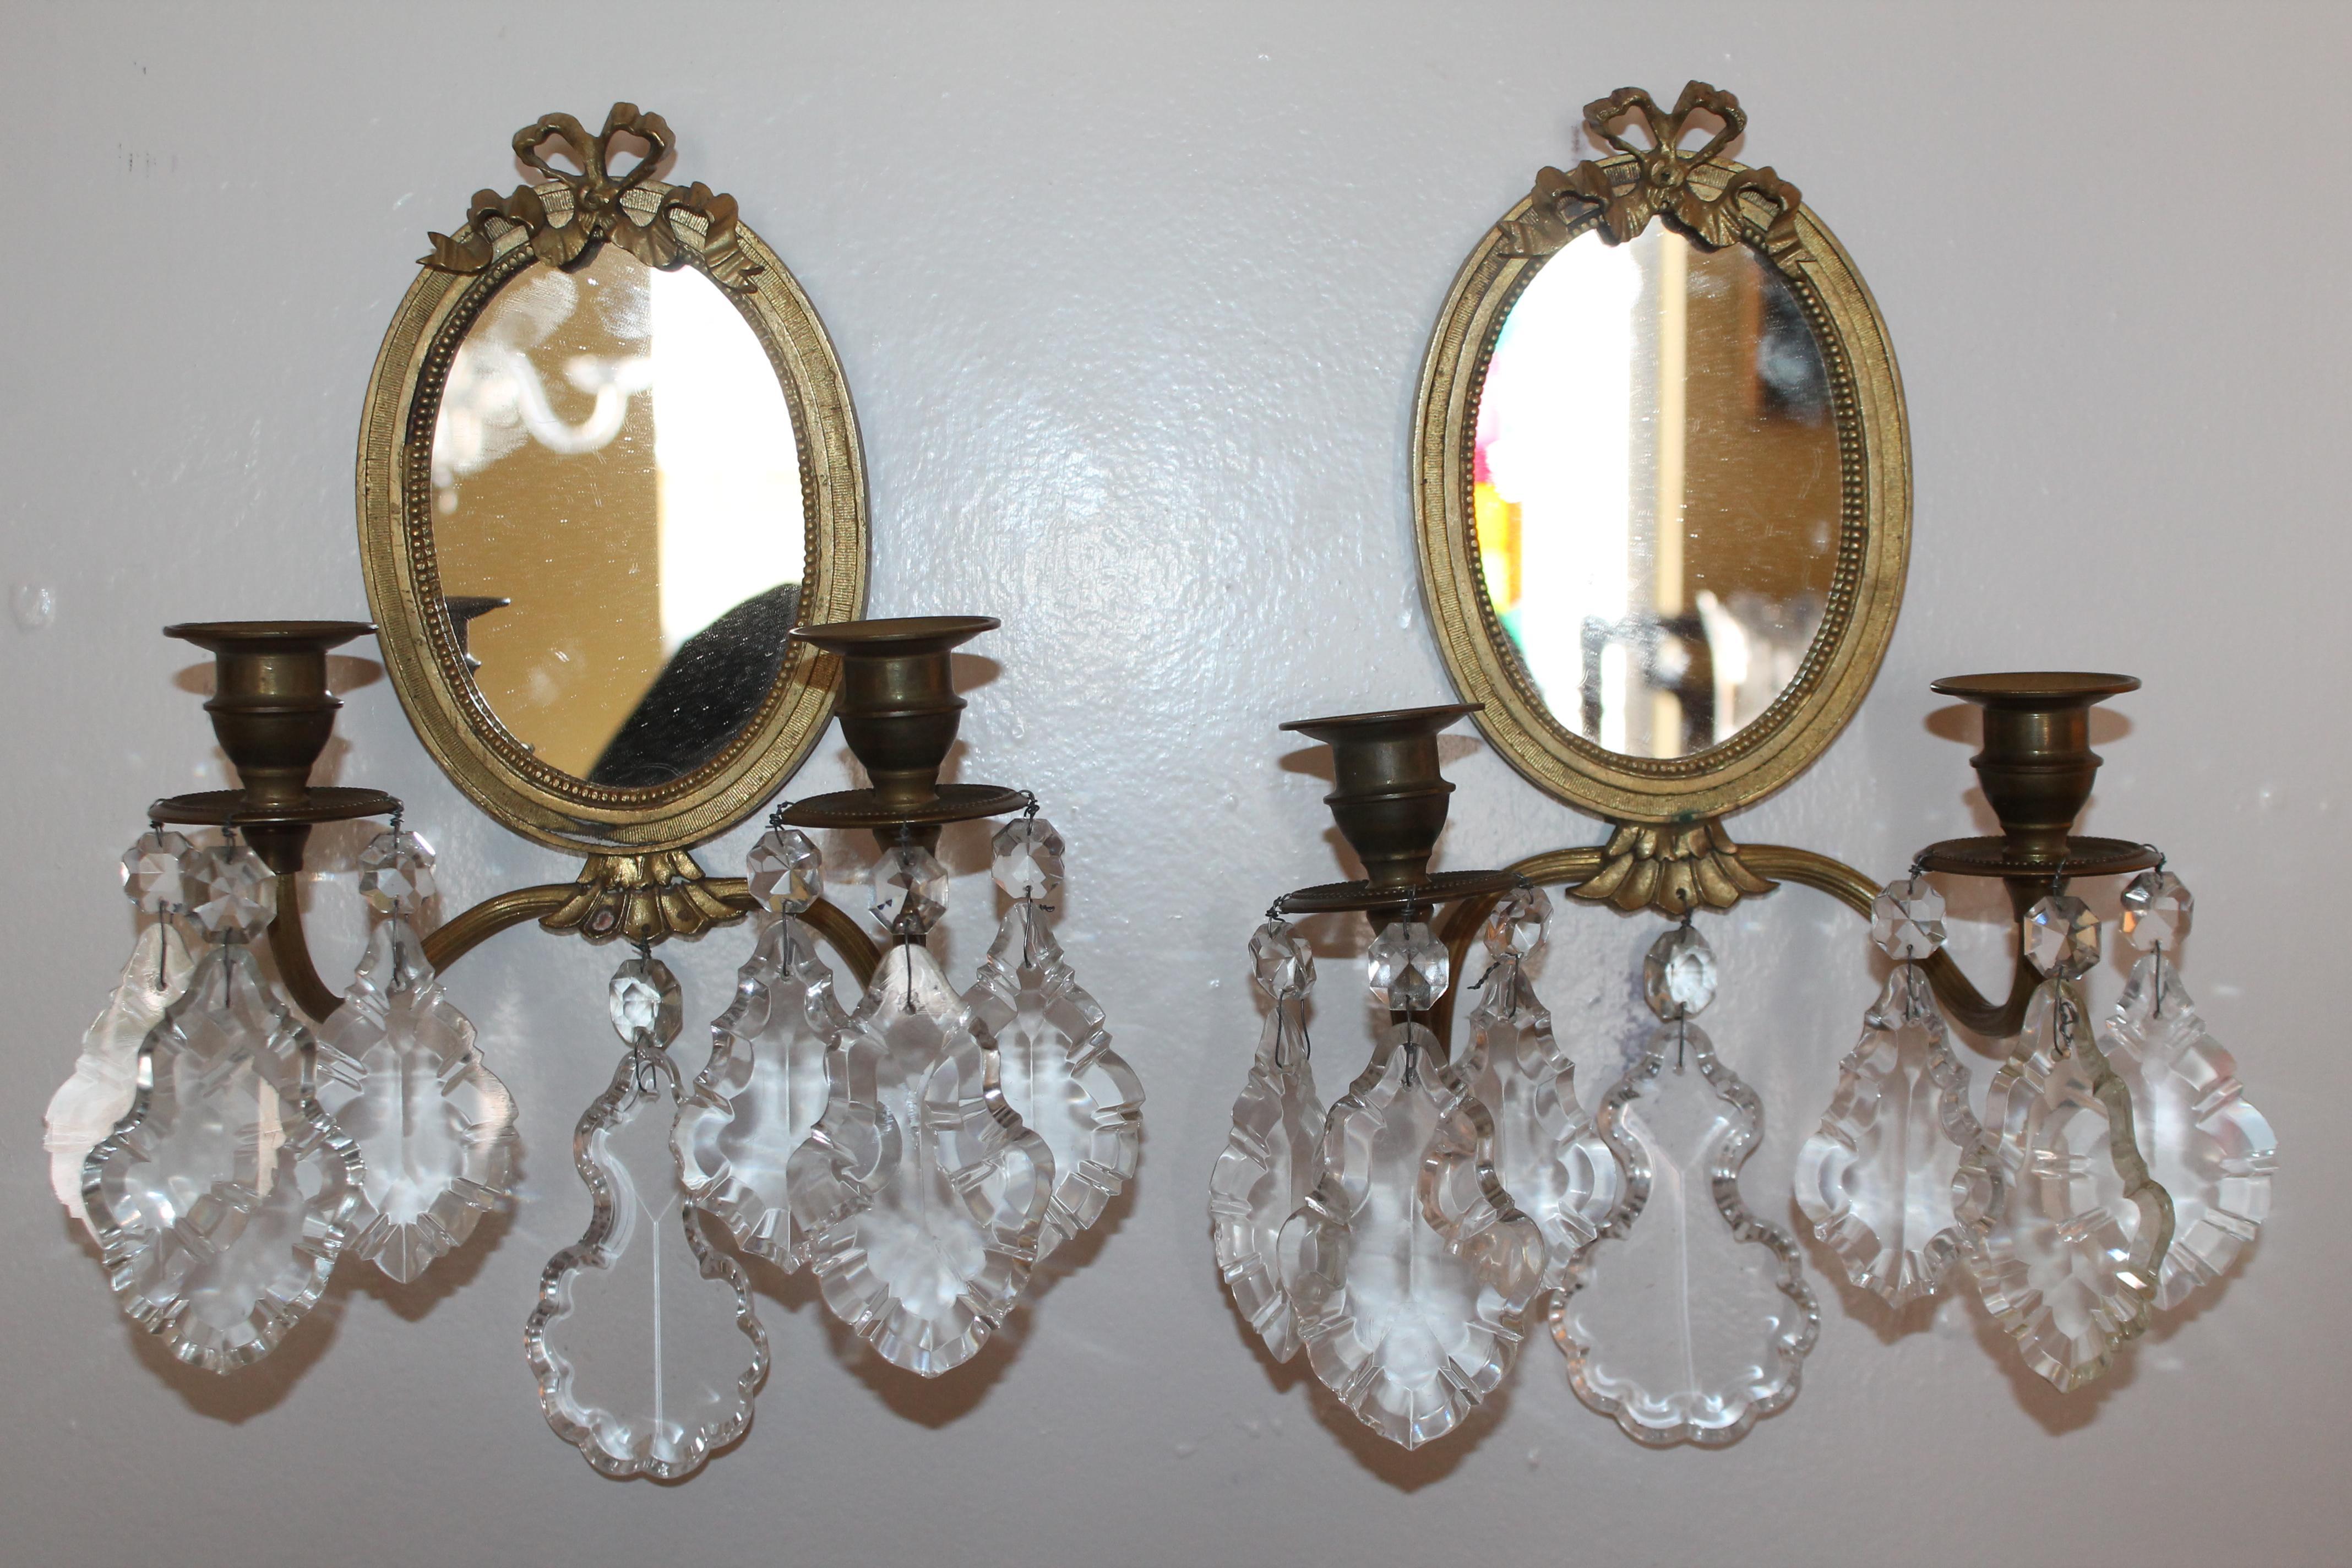 Pair 19thc French Louis XVI Bronze & Crystal Mirror Back Wall Sconces. In their original unelectrified state. Beautiful! Ribbon detail.